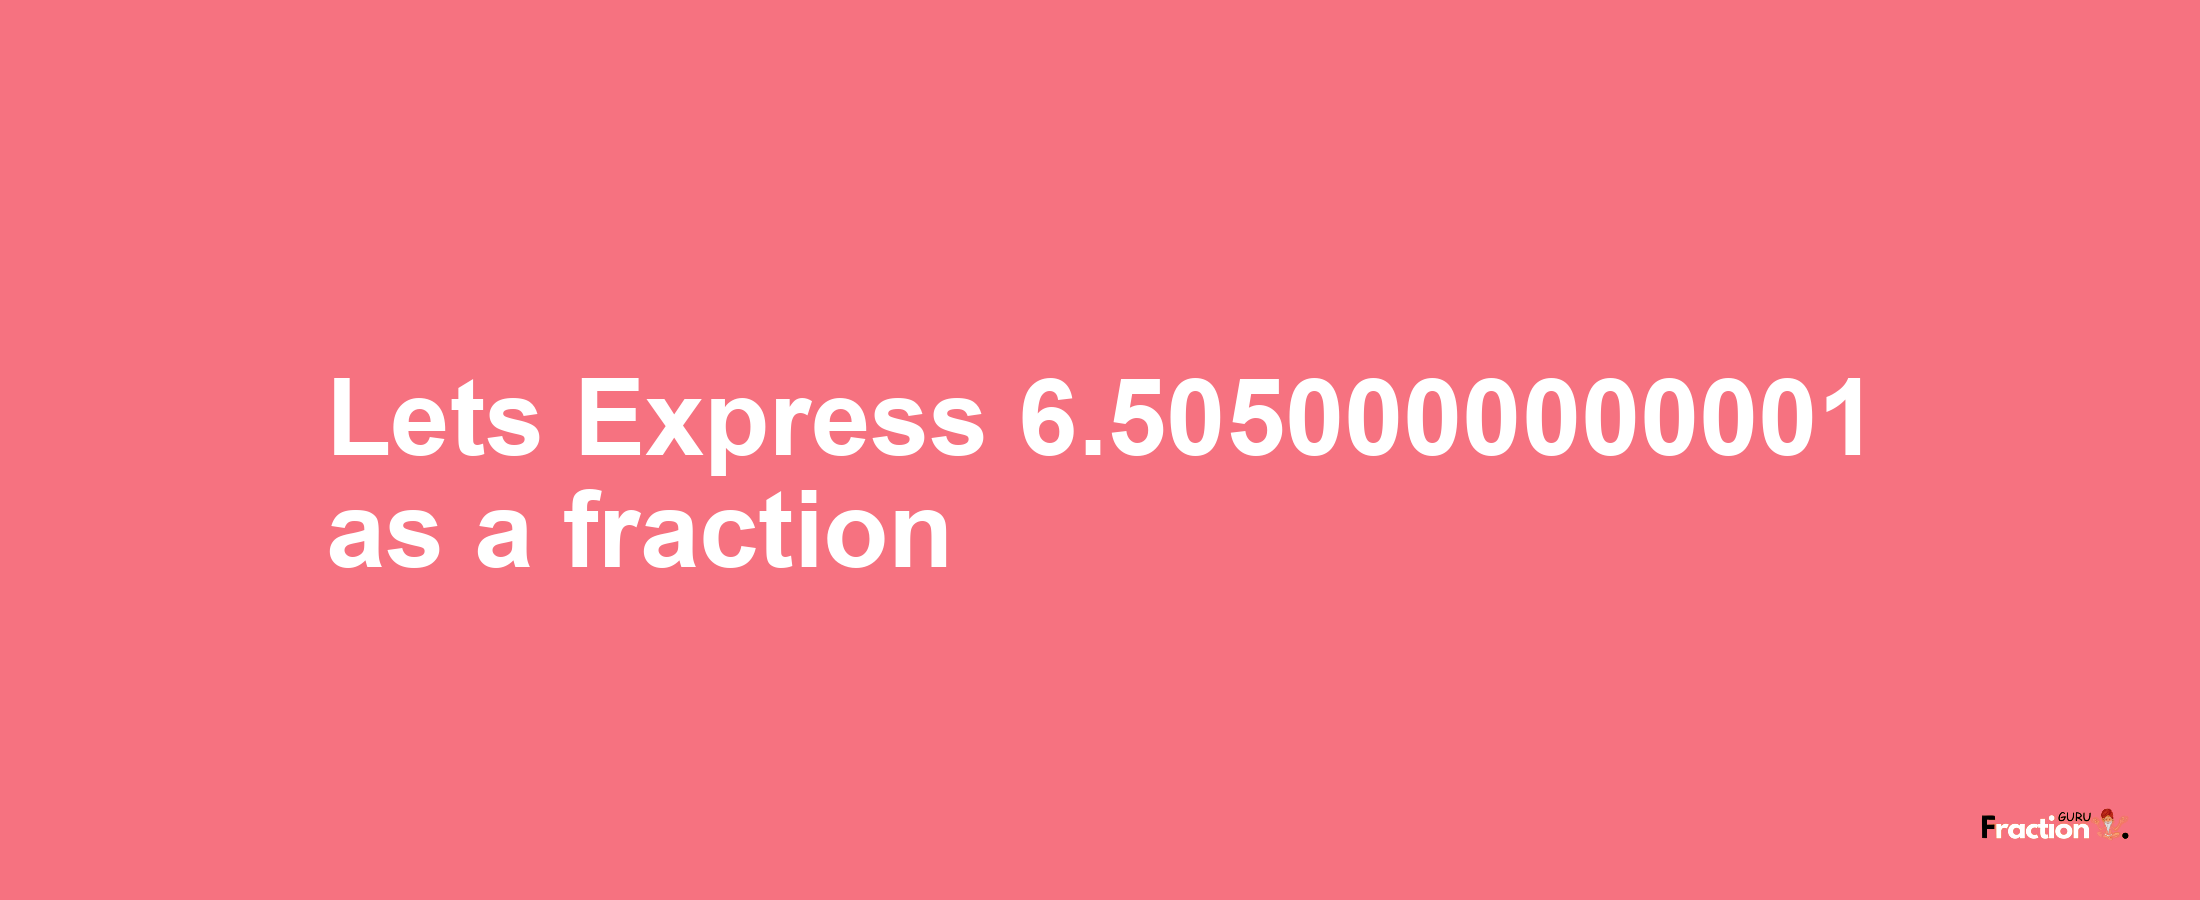 Lets Express 6.5050000000001 as afraction